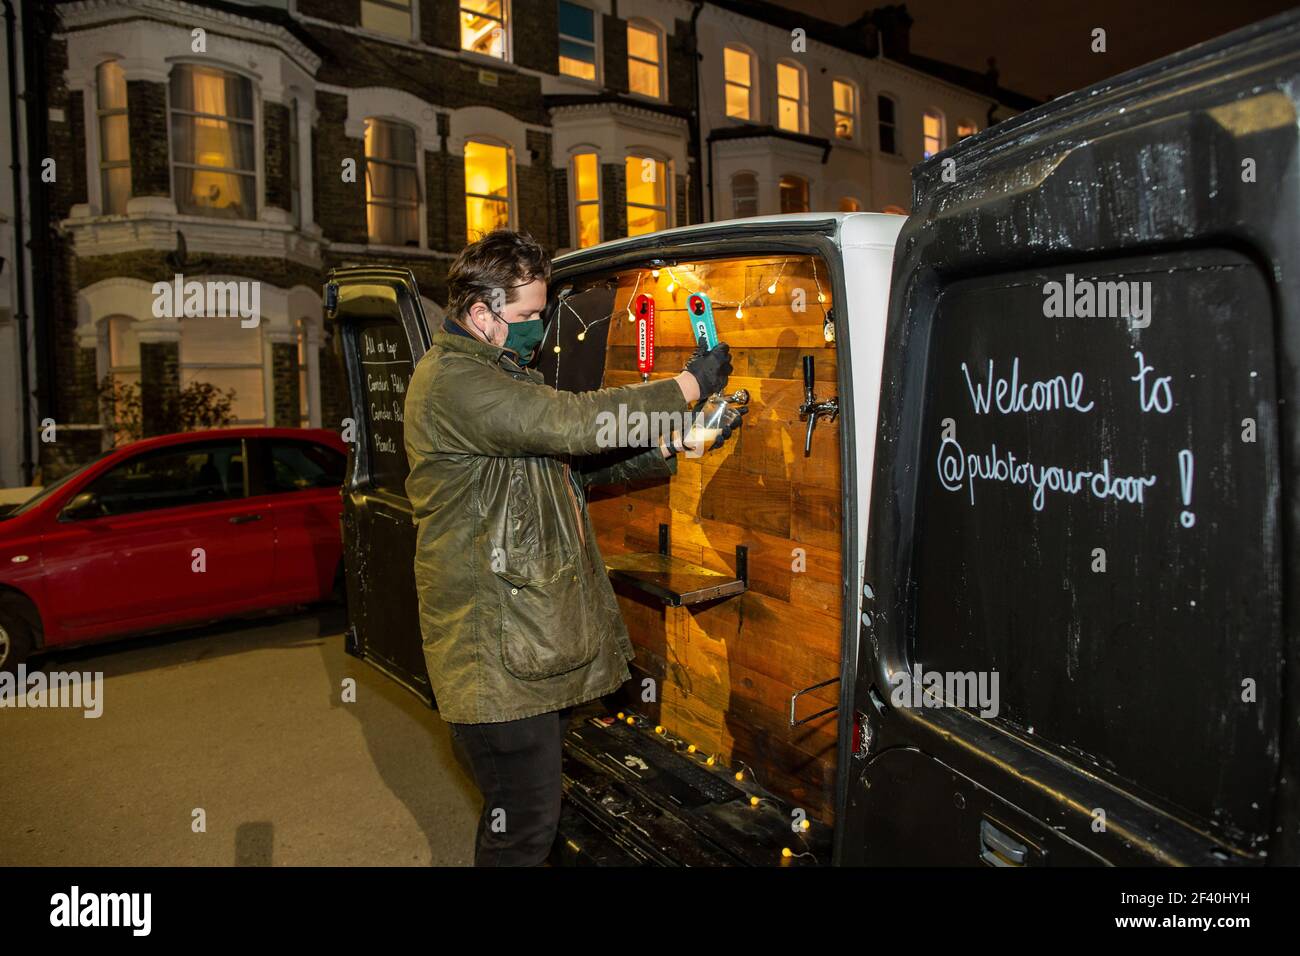 Pub on wheels, a van that serves draft beer and a selection of alcoholic drinks to the door, drop-off service which has become popular during lockdown. Stock Photo